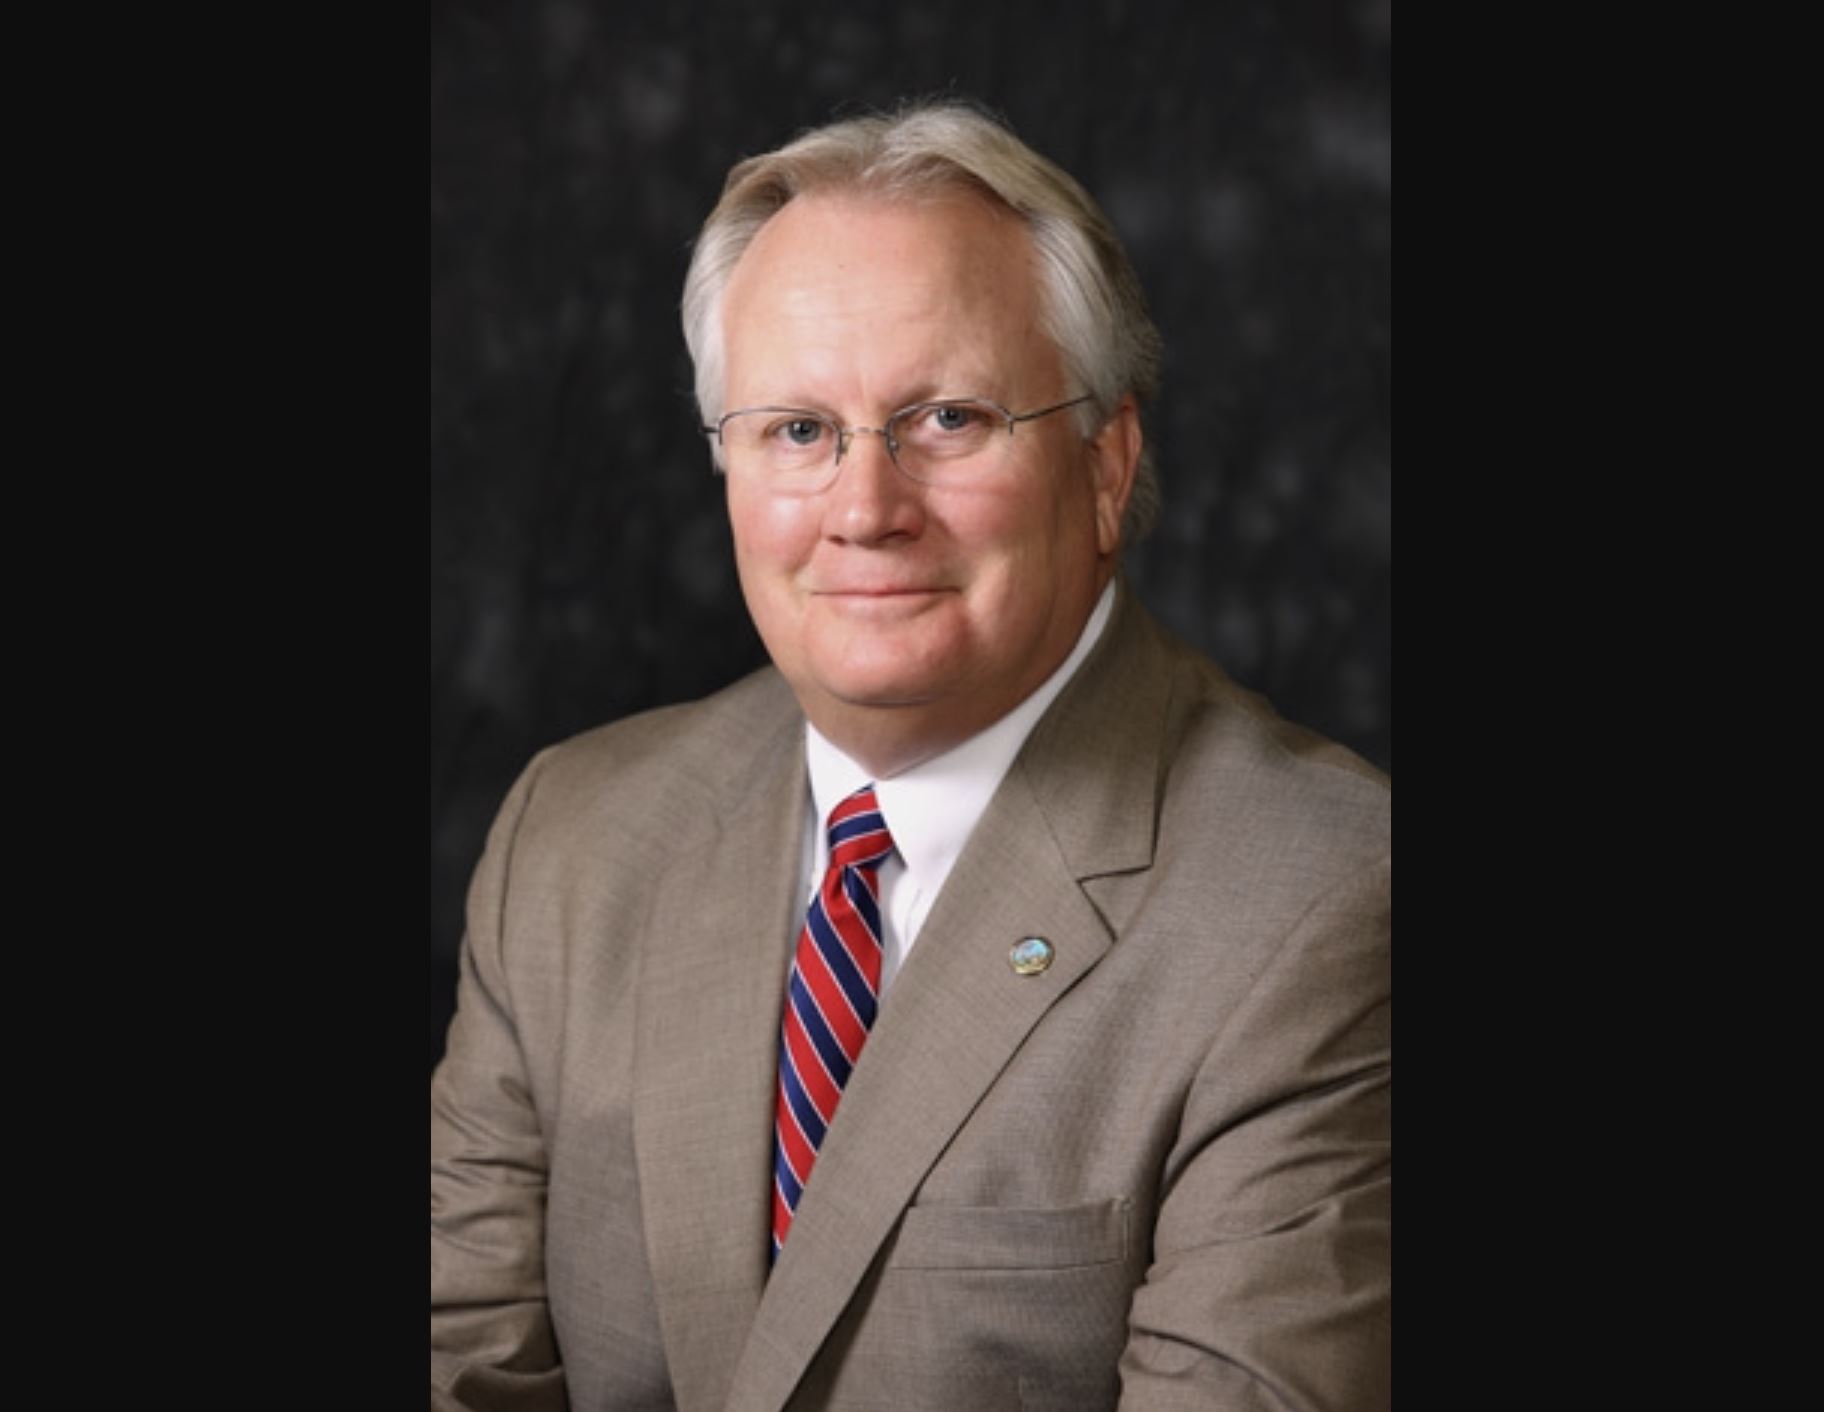 Republican Jerry Carl wins election to U.S. House in Alabama's 1st Congressional District